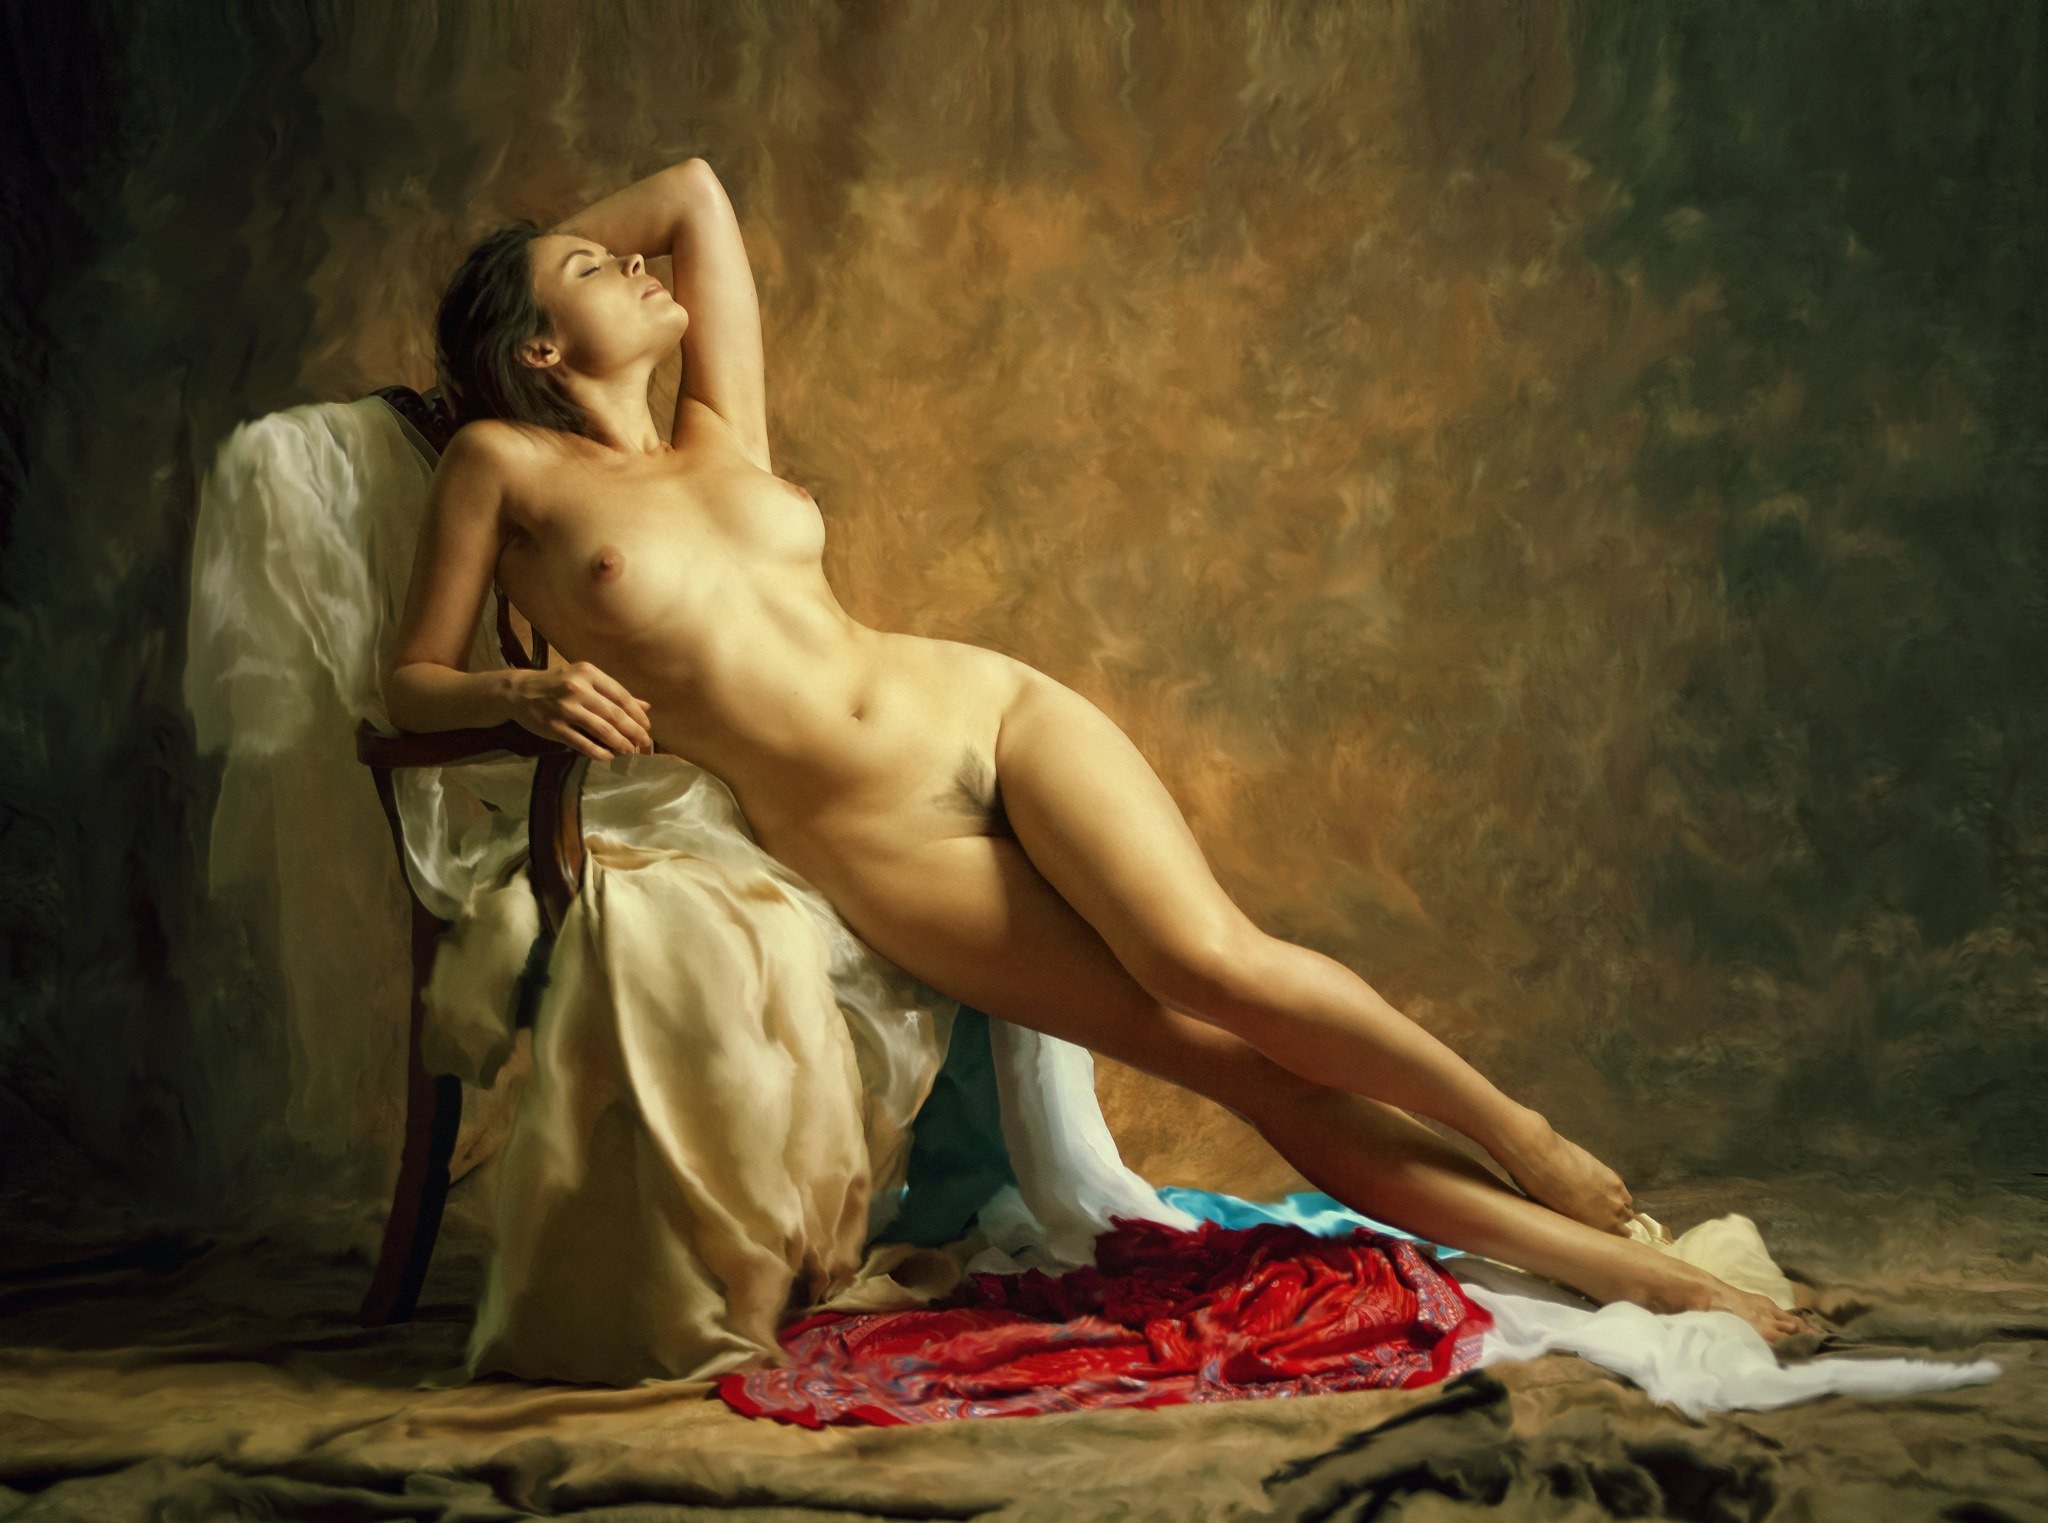 Artistic nude images